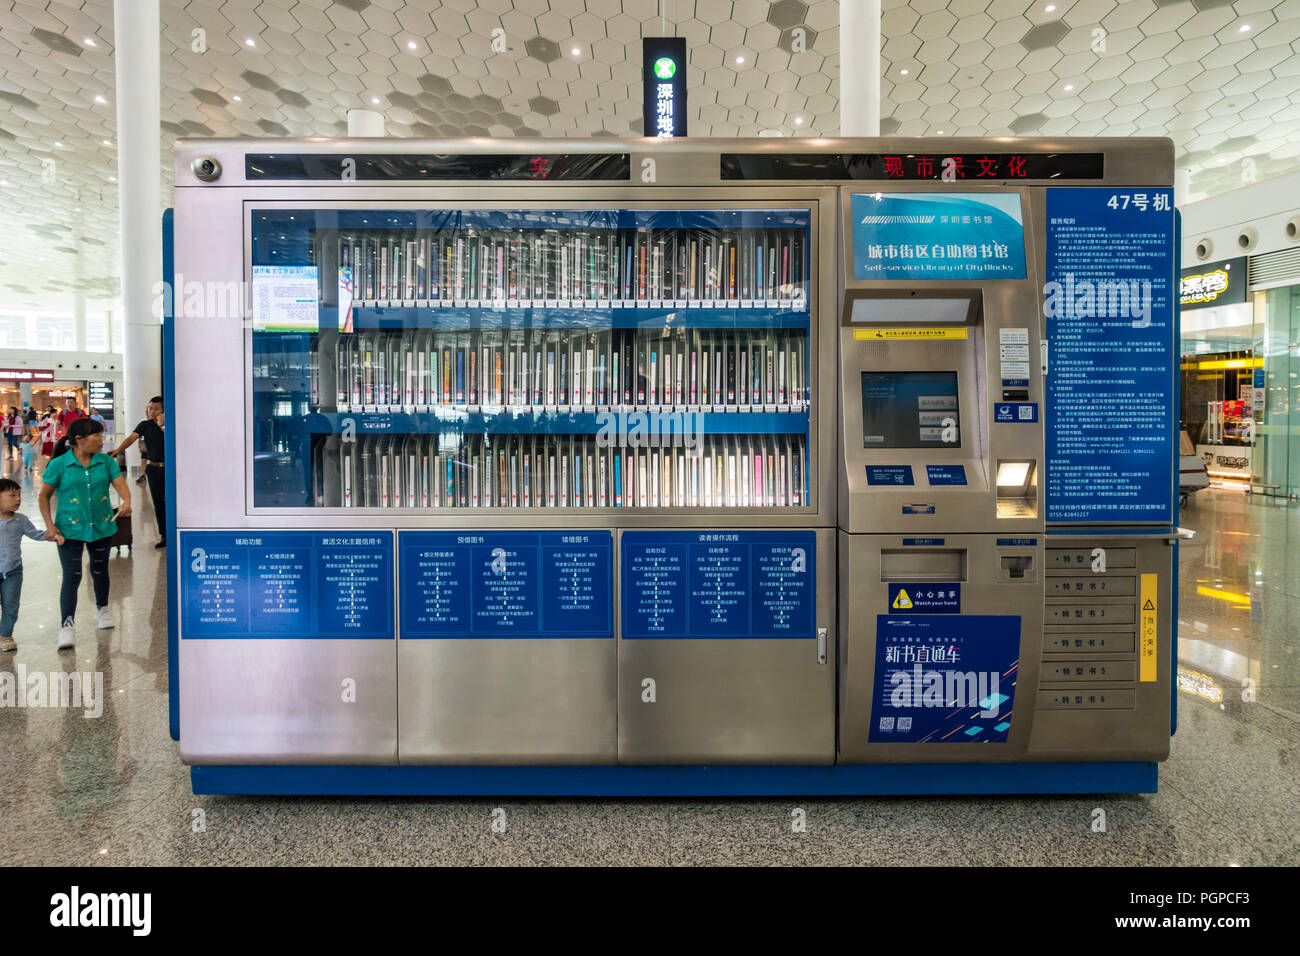 Self-service automated mini library in Shenzhen China Stock Photo